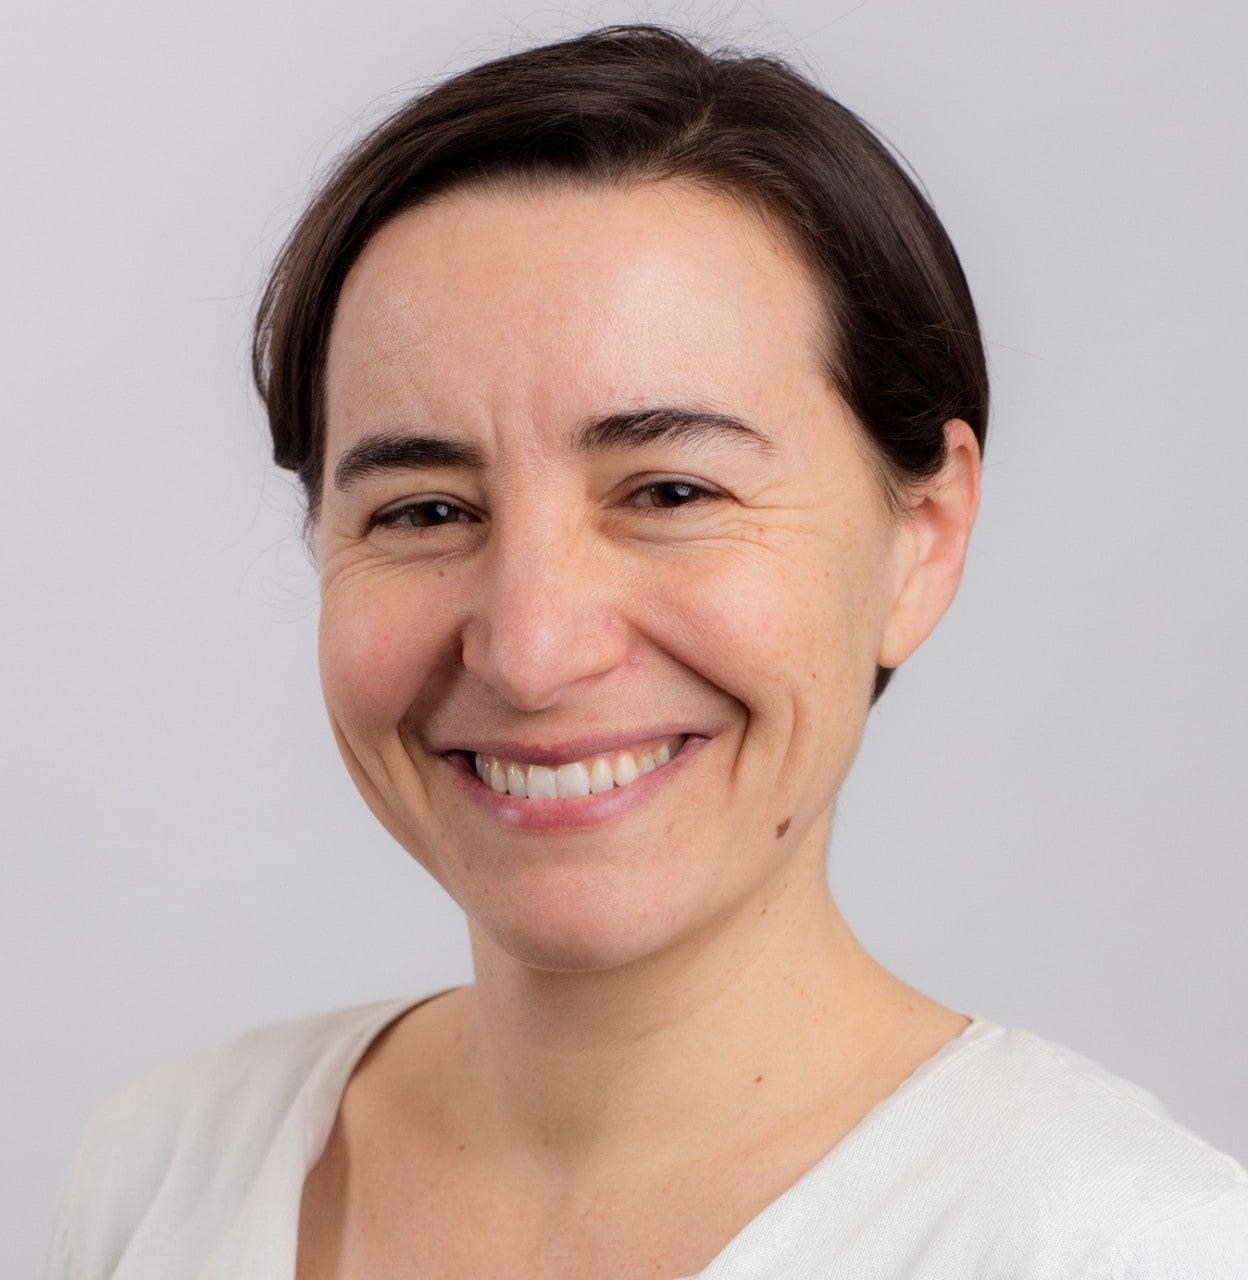 An image of Associate Professor Amy Conley Wright, Director of the Institute of Open Adoption Studies at the University of Sydney.